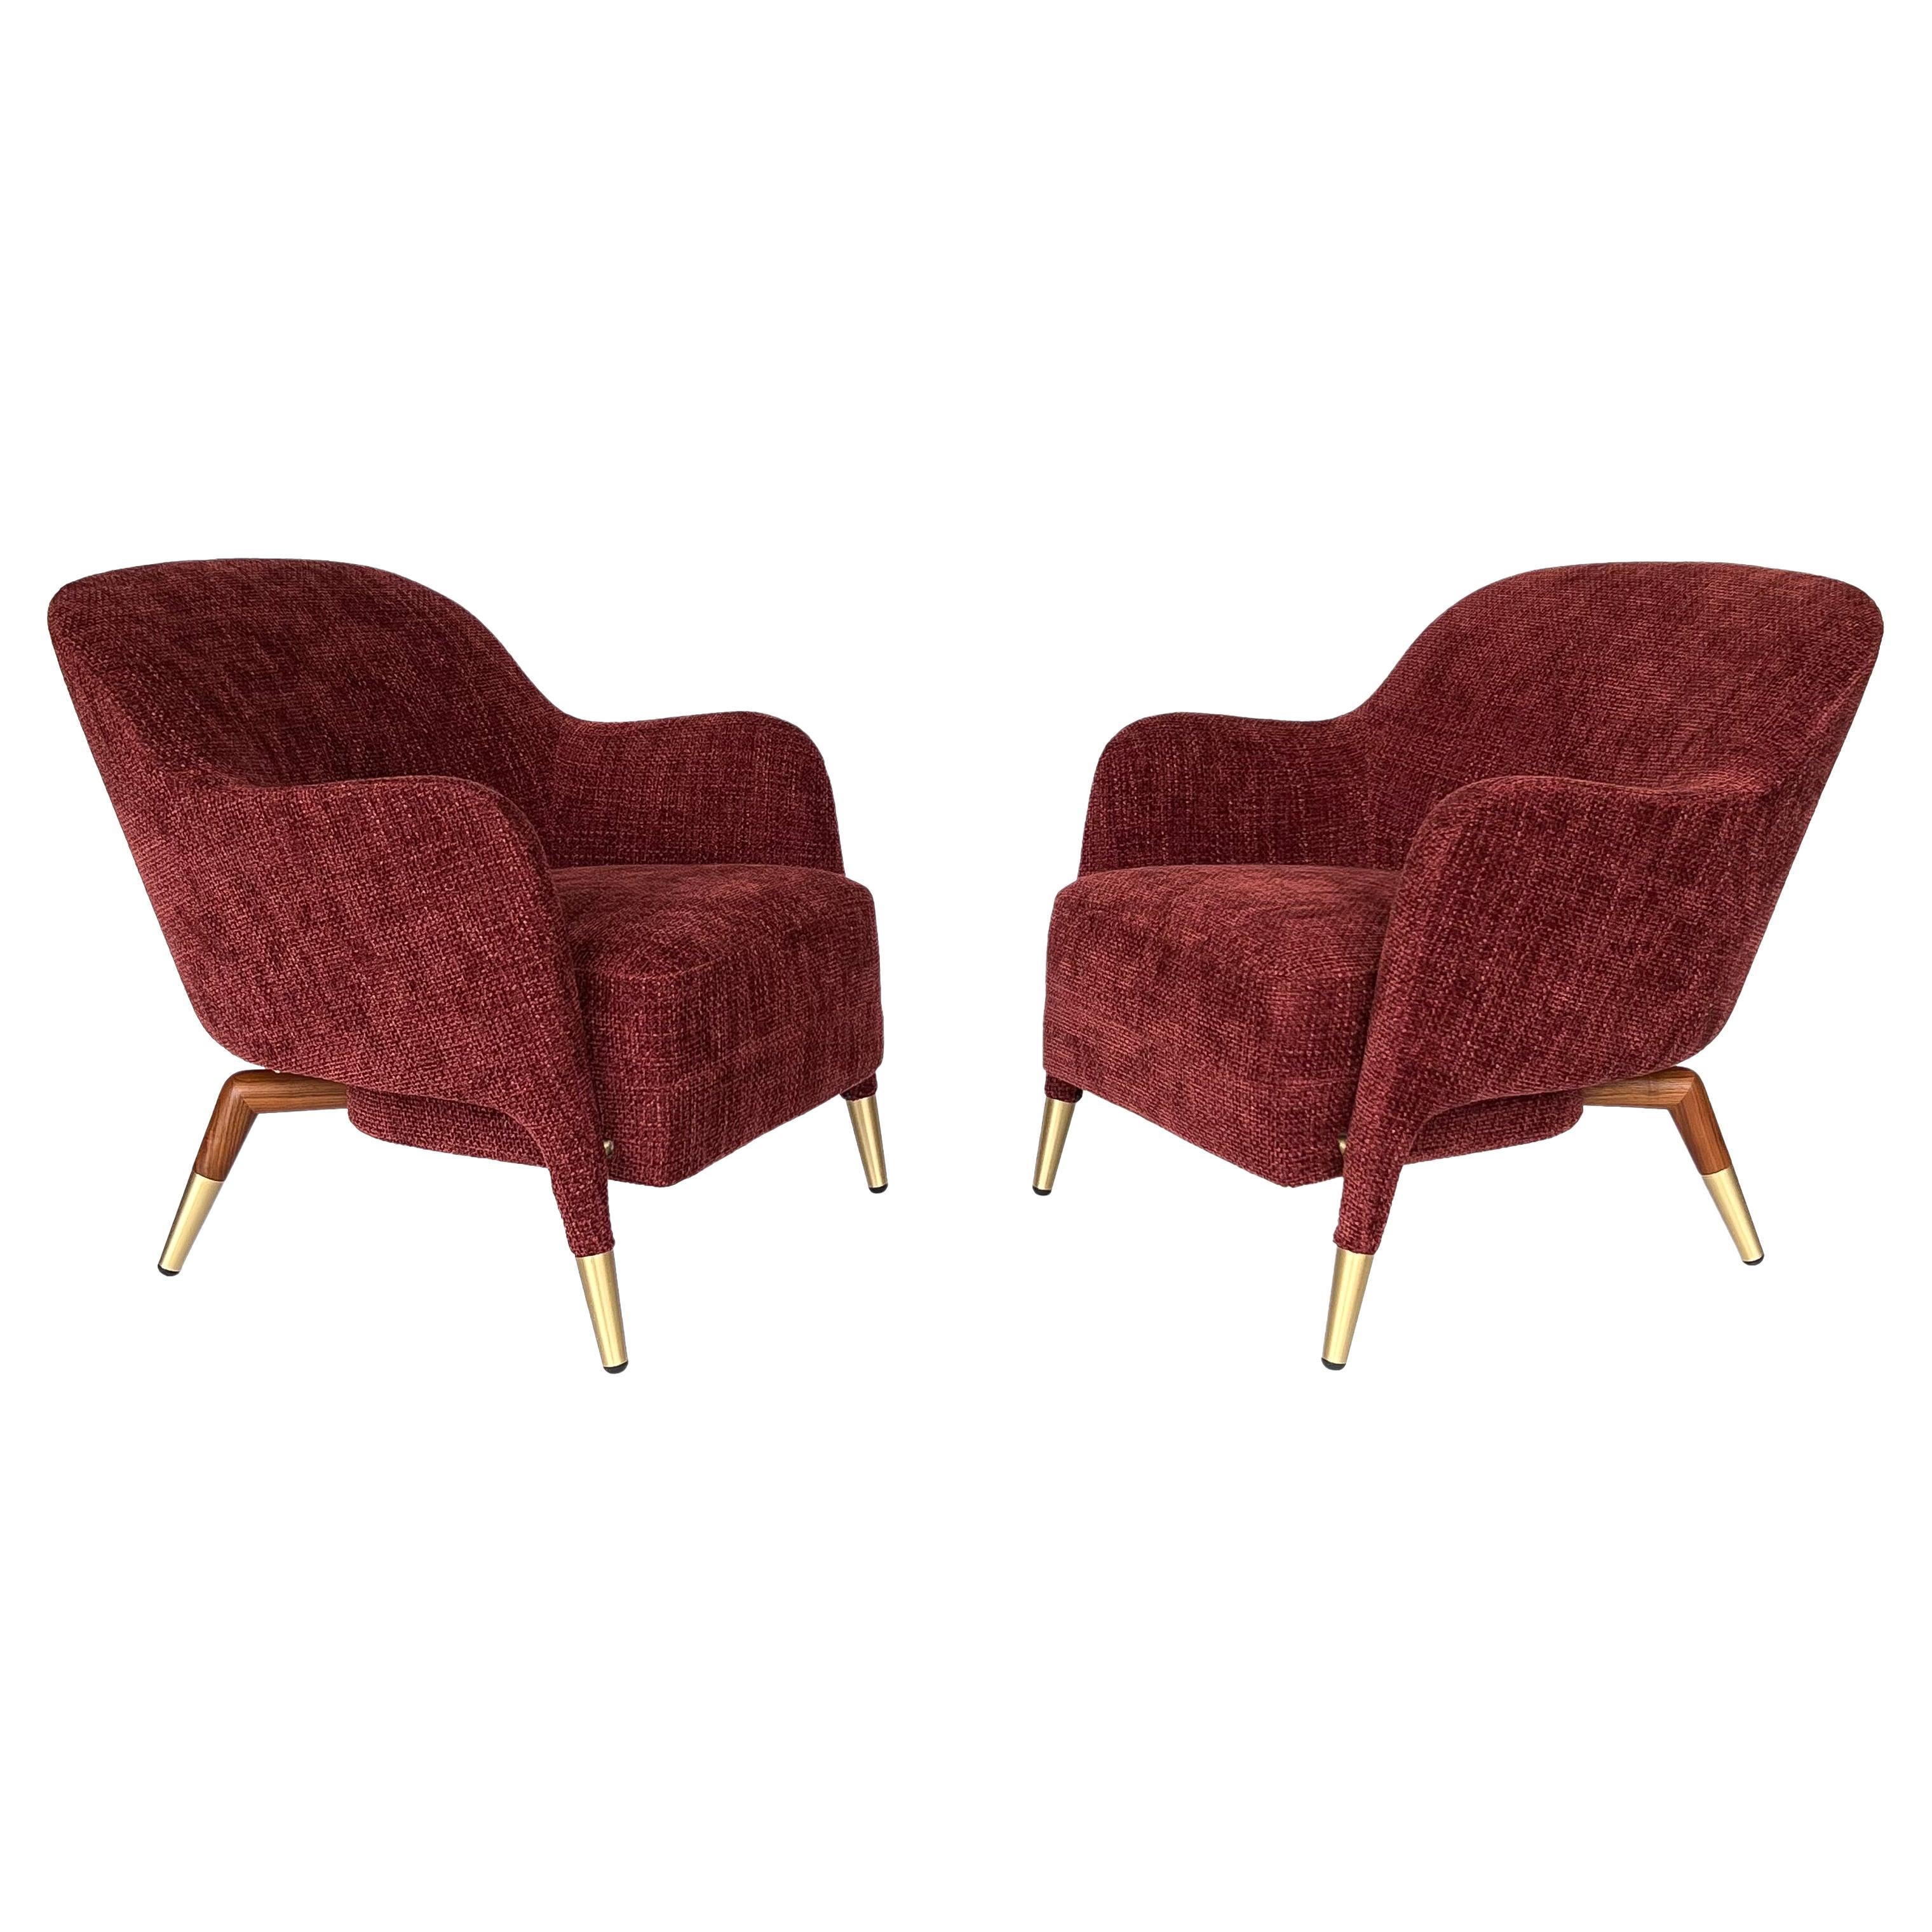 Pair of Gio Ponti D.151.4 Molteni & C Lounge Chairs